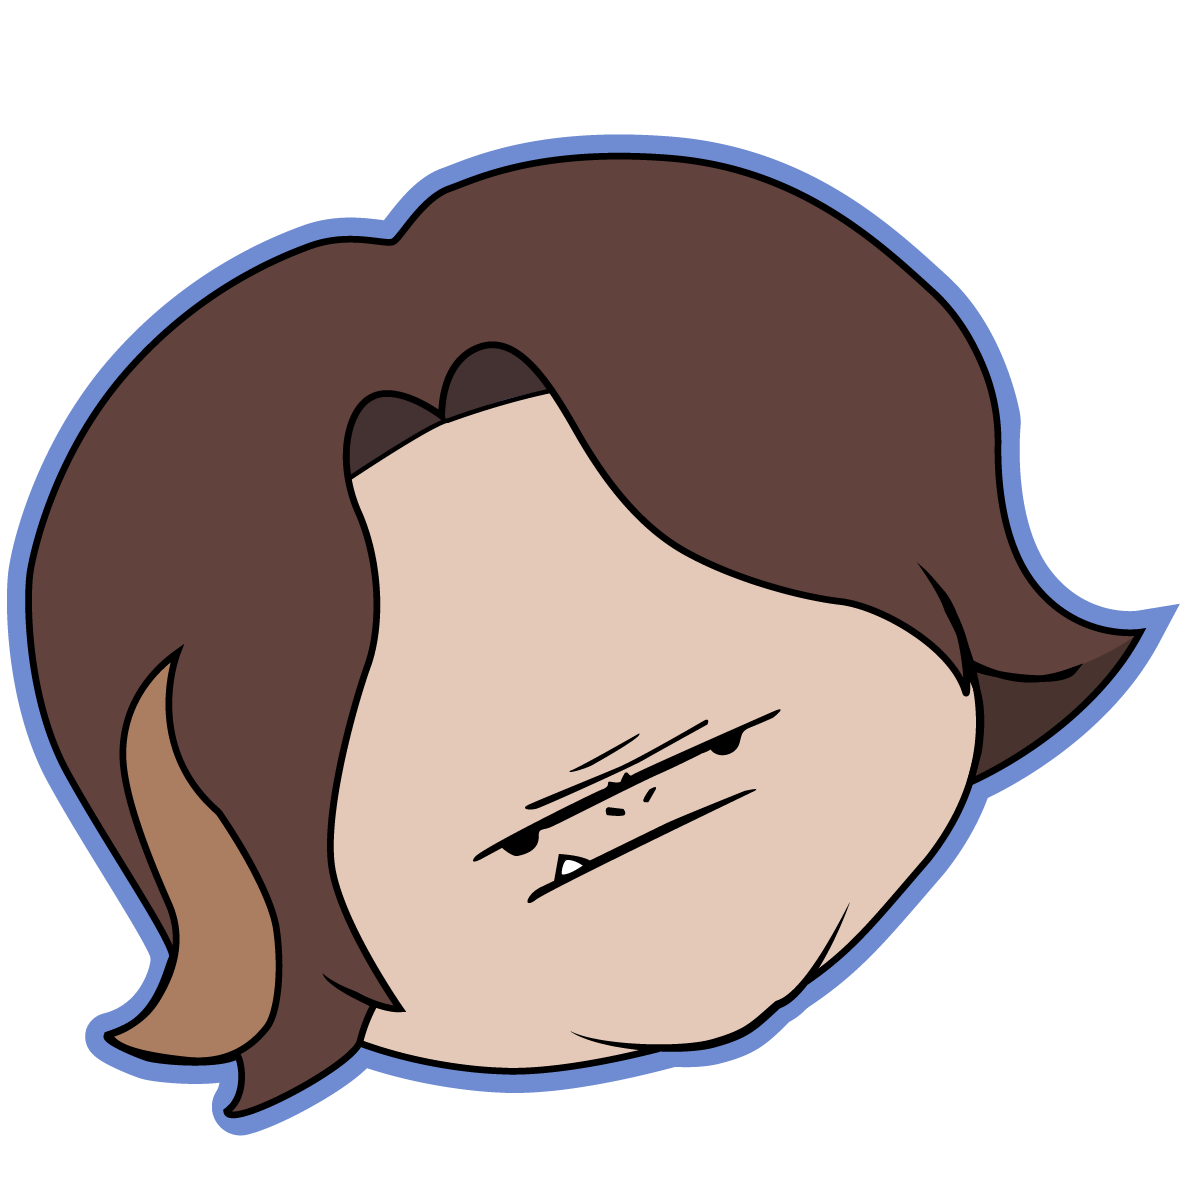 Image - Arin Drump.png | Game Grumps Wiki | FANDOM powered by Wikia